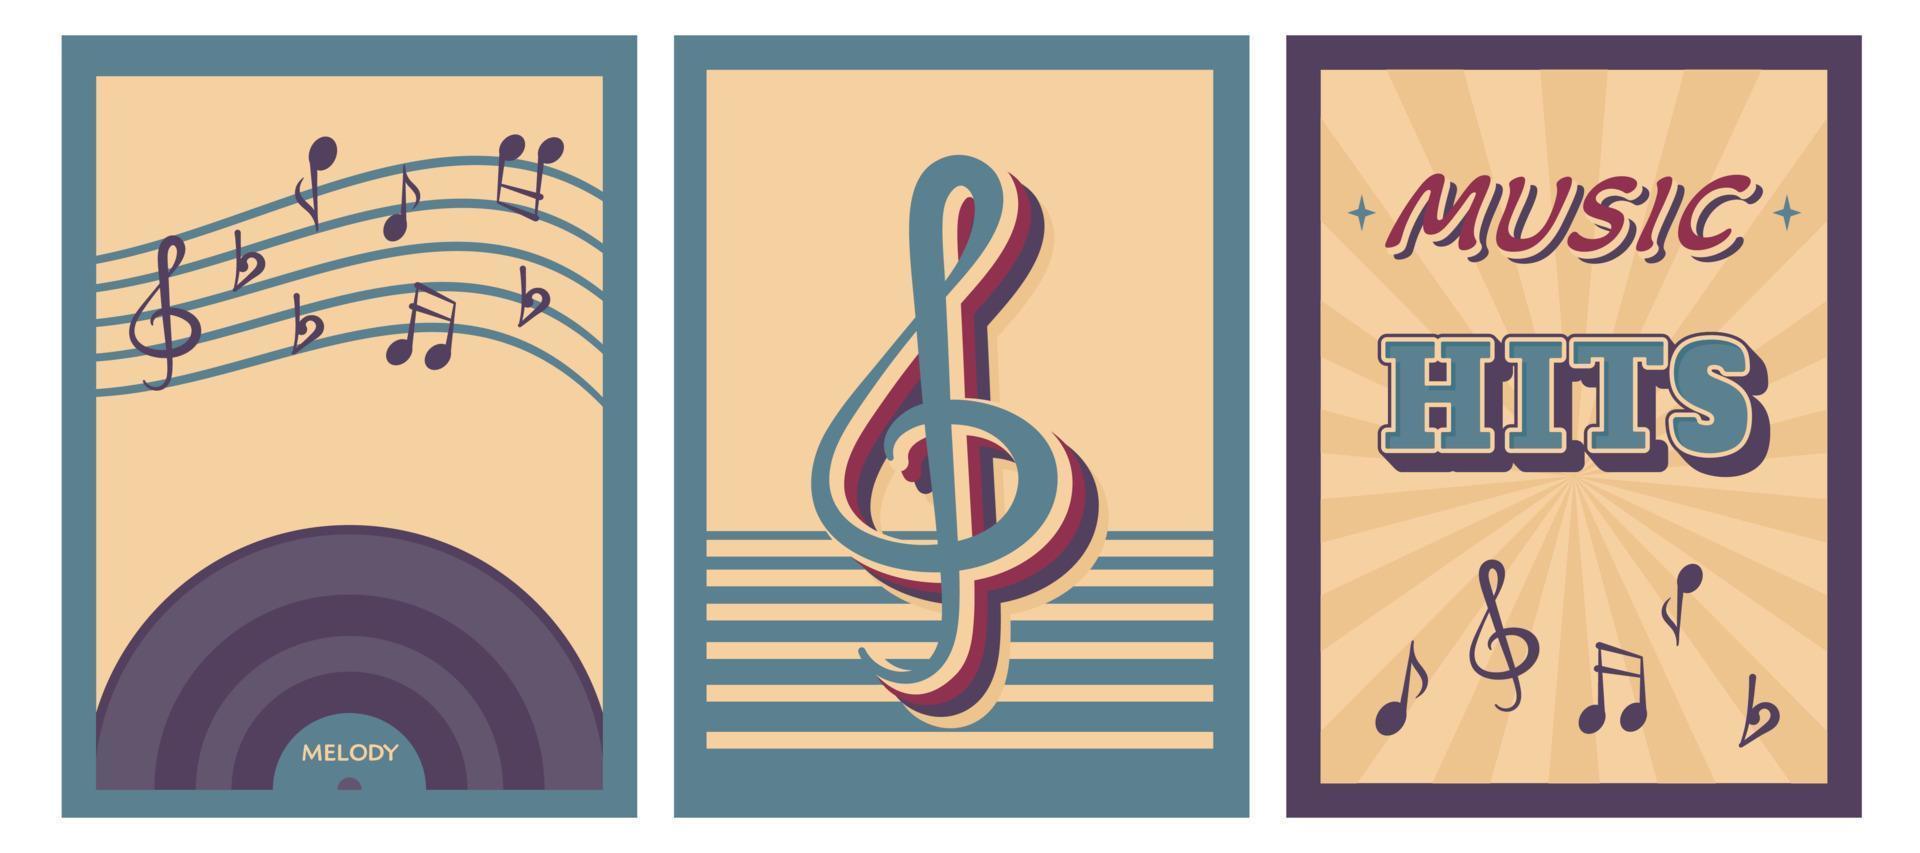 Retro music poster. Set of vintage background with musical disc, notes, lettering. Vector illustration for banner, flyer, placard, disco party, festival, invitation, advertising.